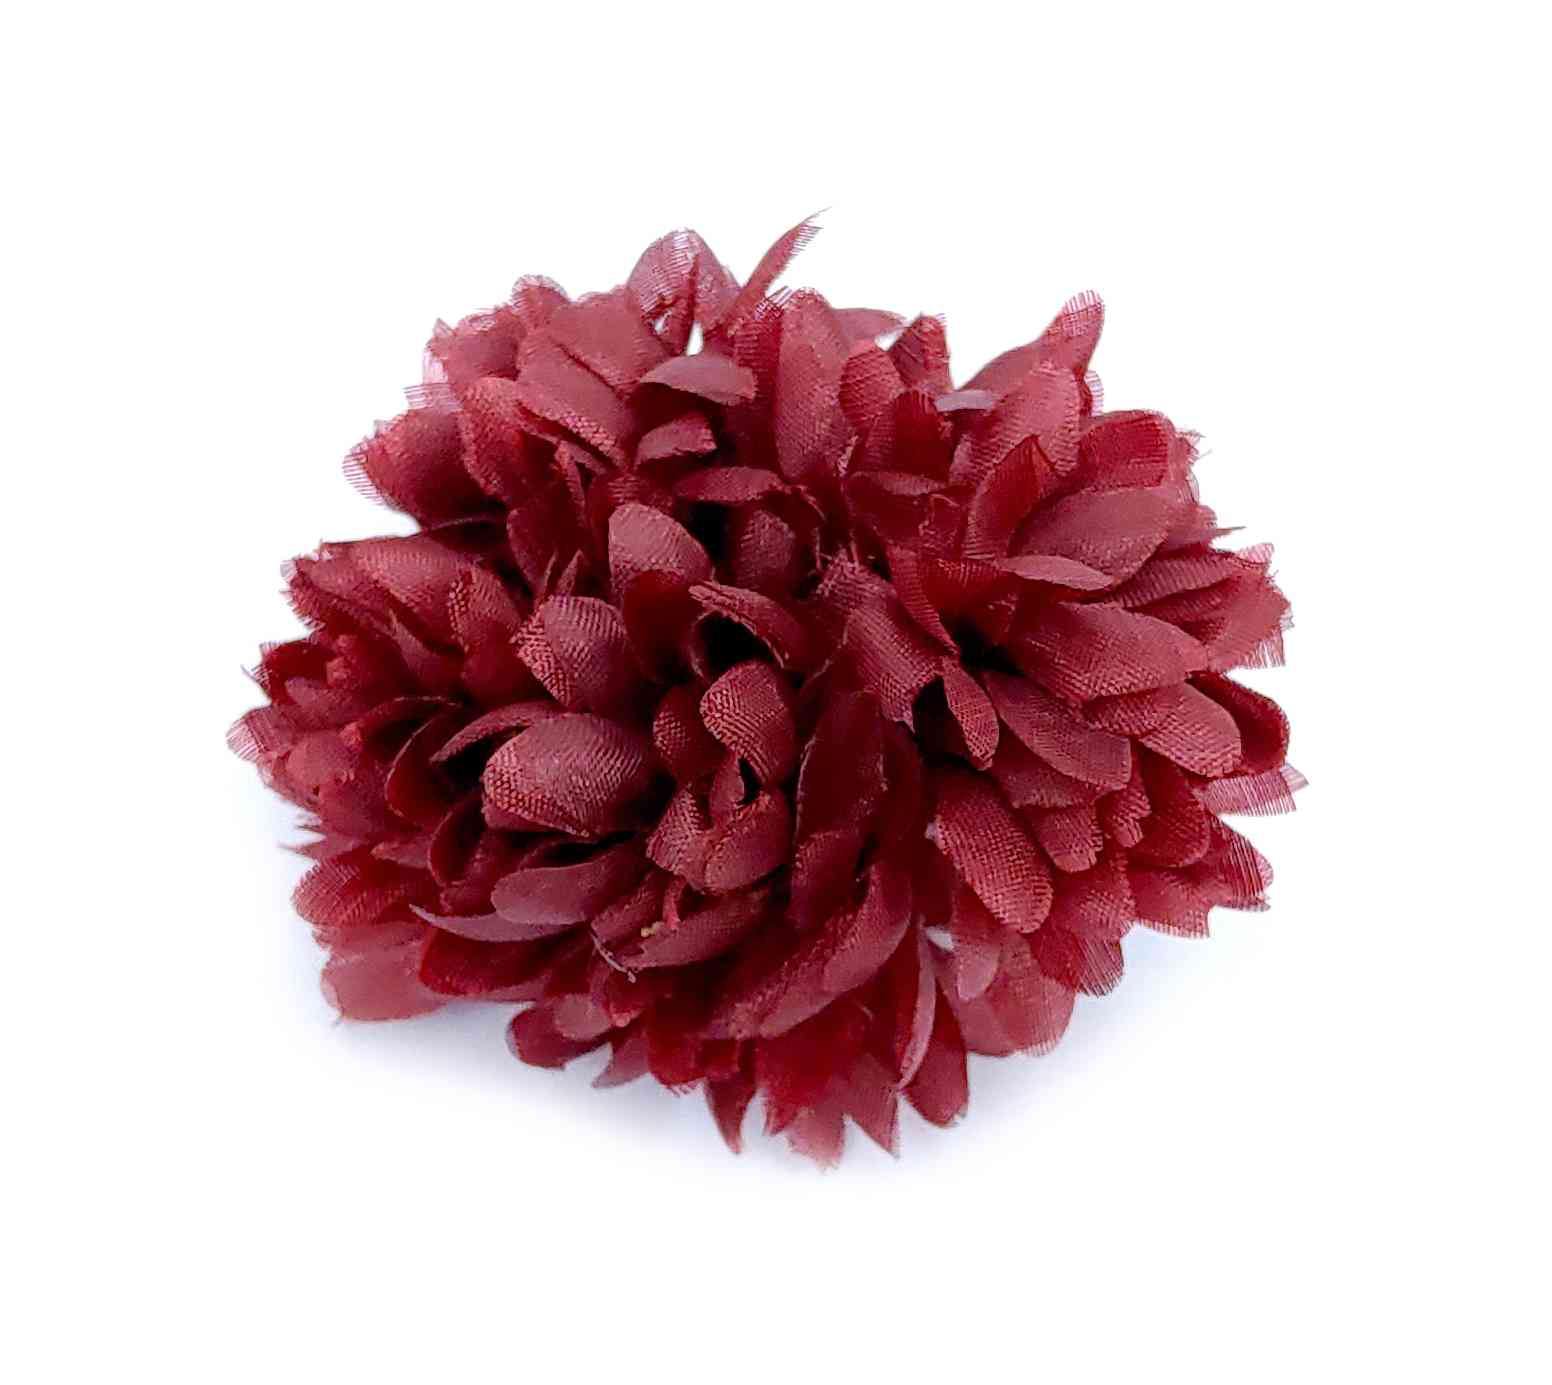 Beautiful Fabric Flowers for DIY Craft, Trouseau Packing or Decoration (Bunch of 12) - Design 20 - Indian Petals